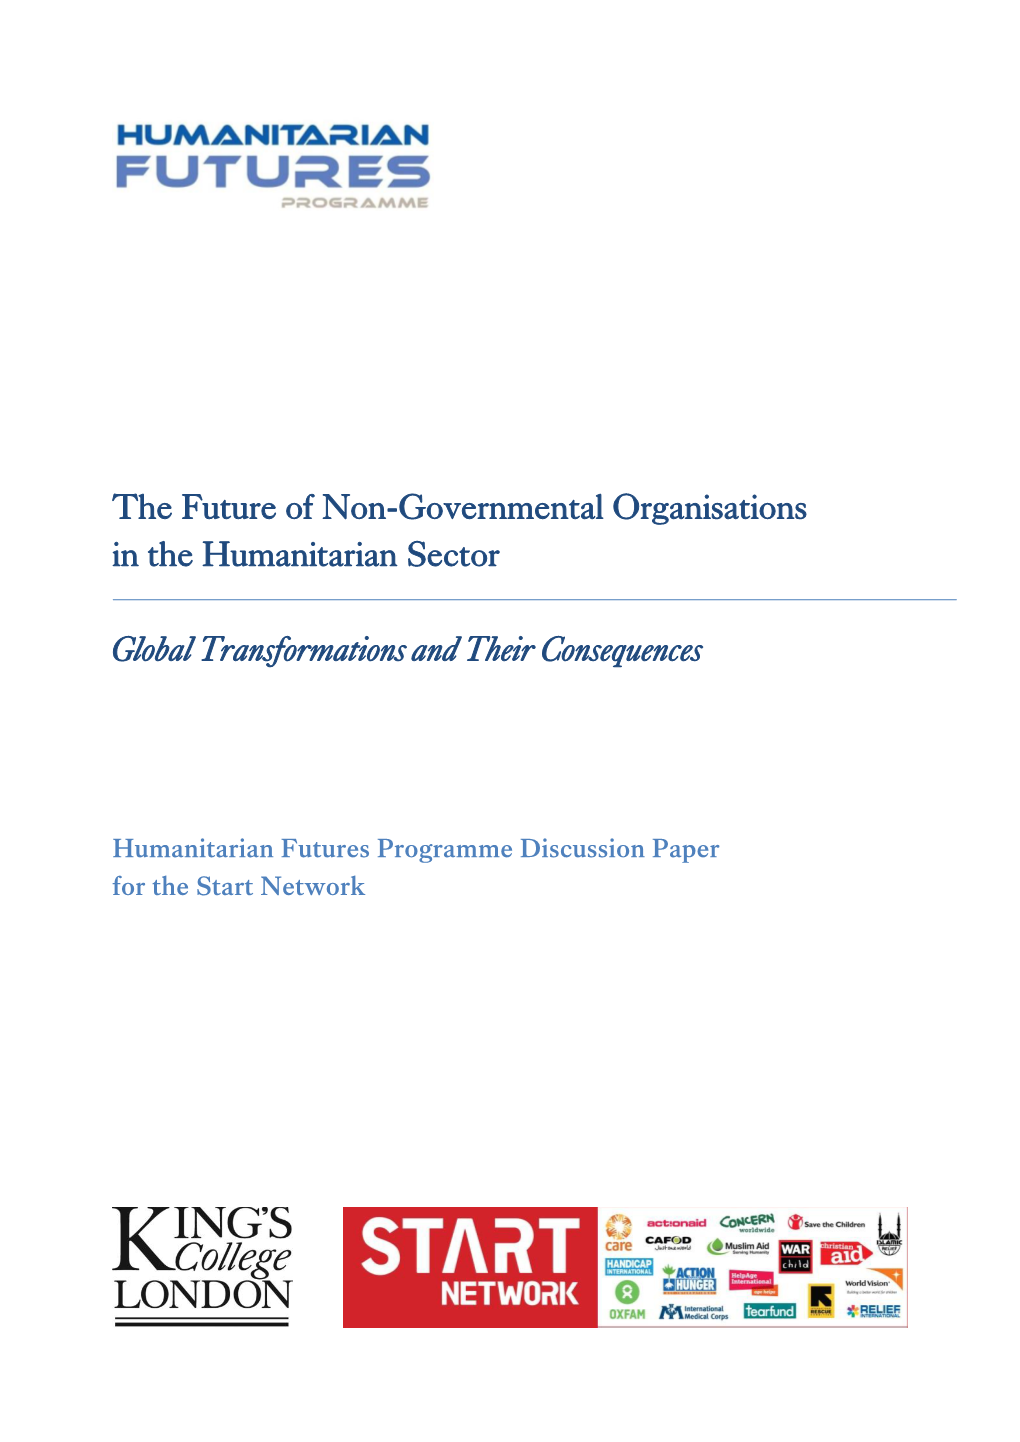 The Future of Non-Governmental Organisations in the Humanitarian Sector Global Transformations and Their Consequences